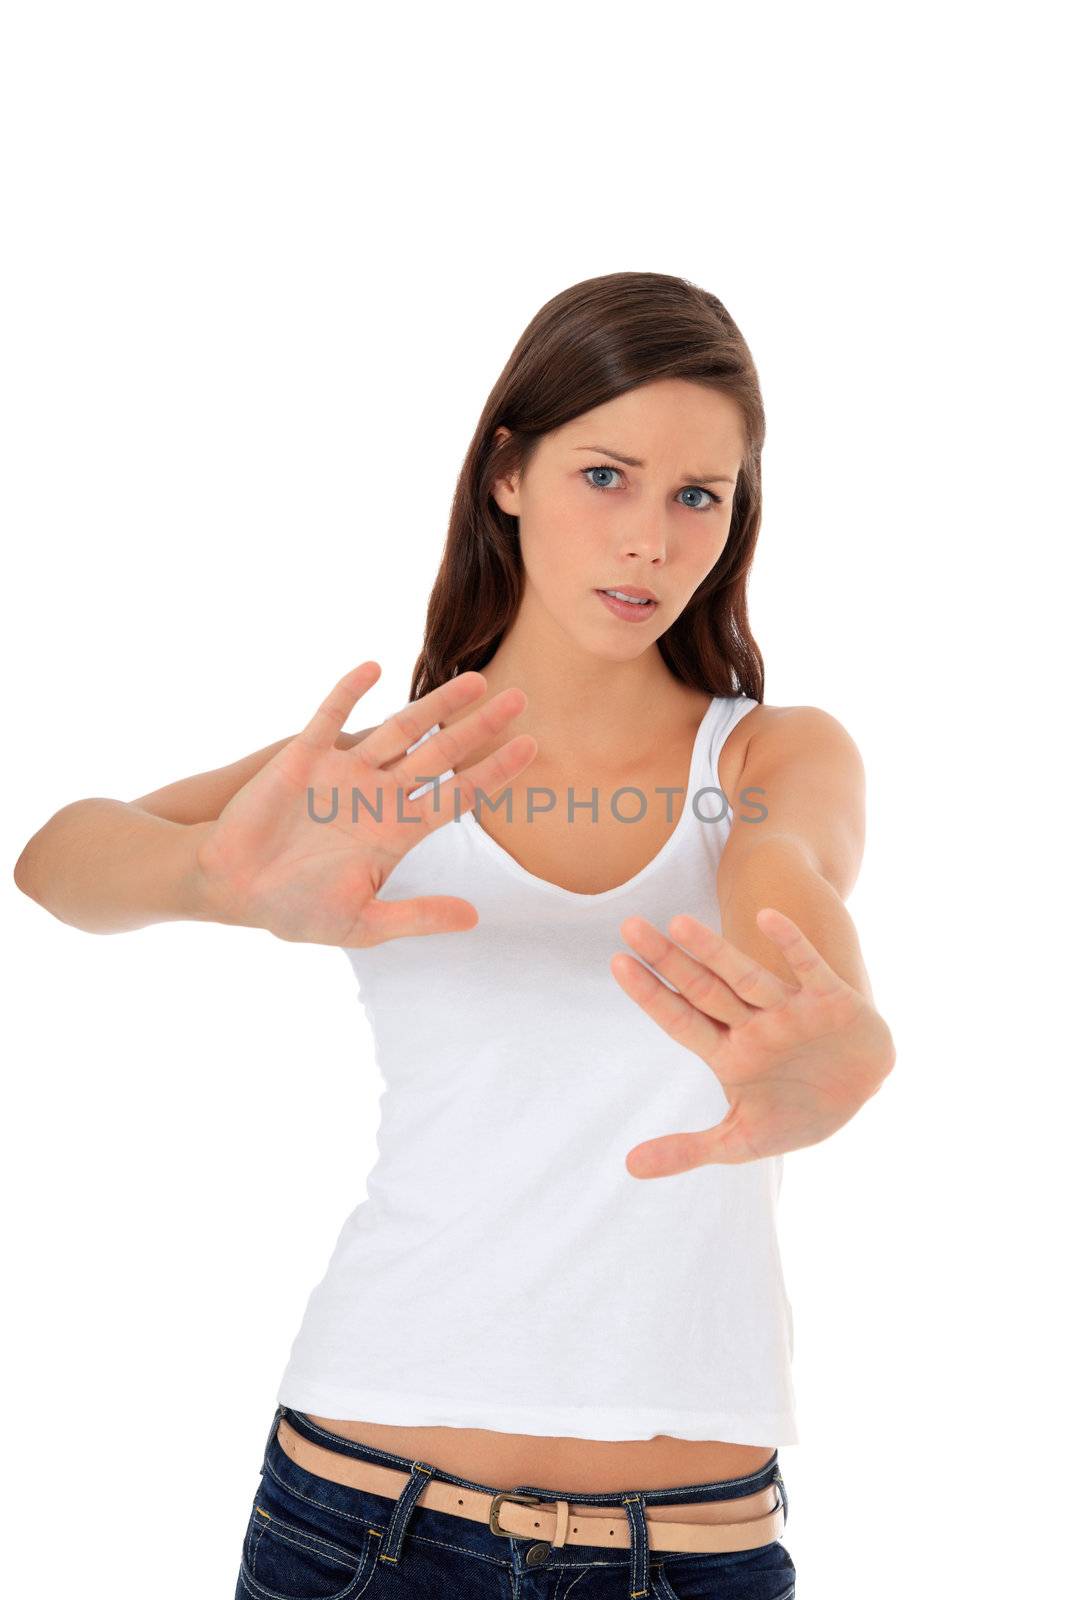 Attractive young woman making repelling gesture. All on white background.